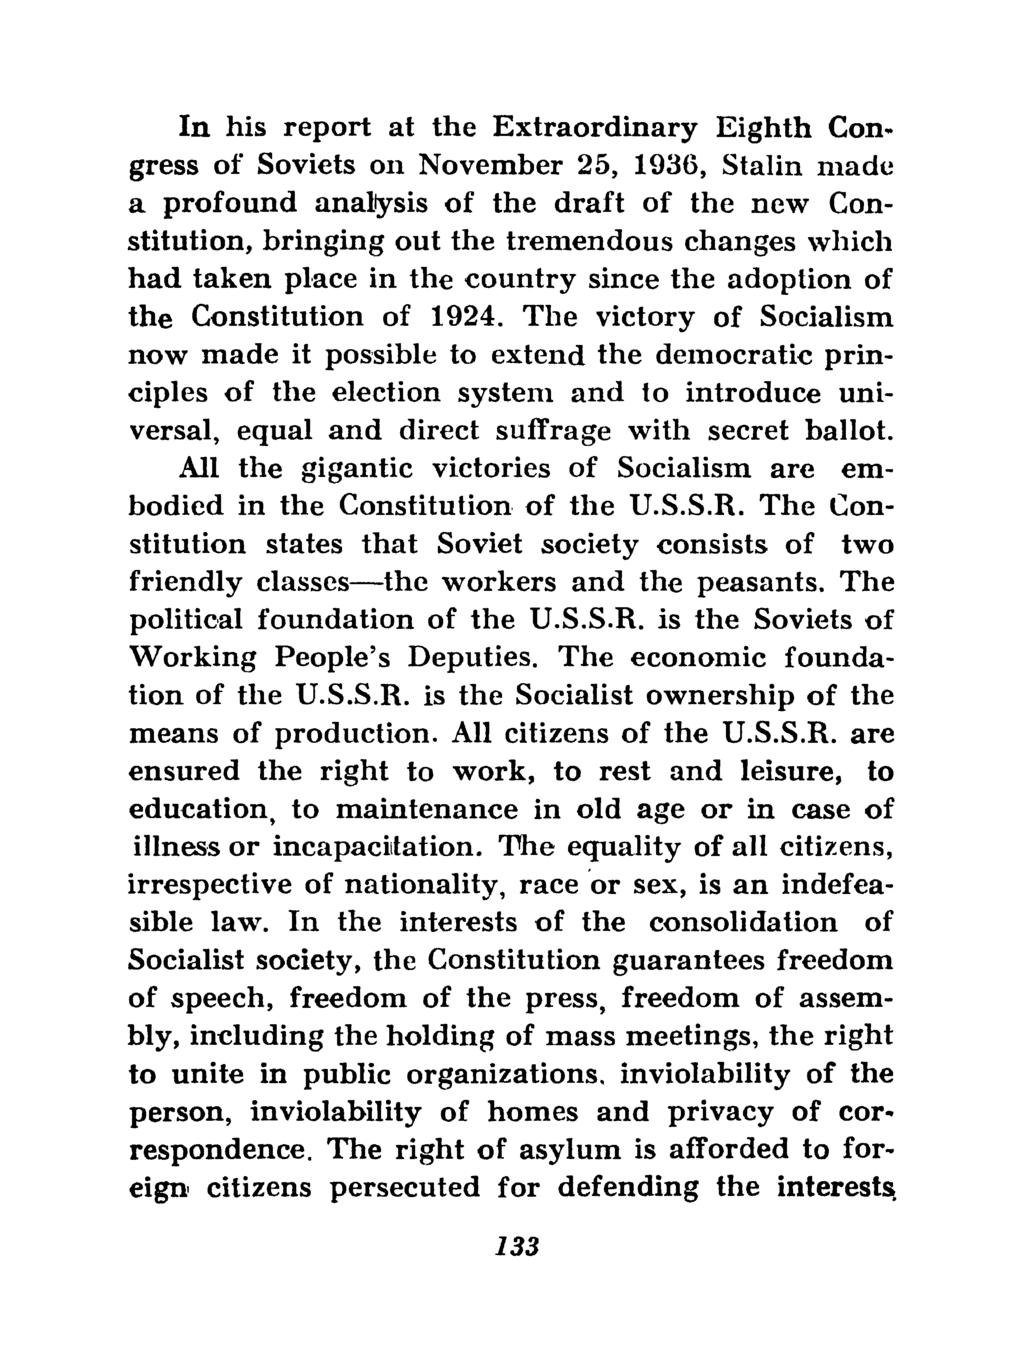 In his report at the Extraordinary Eighth Congress of Soviets on November 25, 1936, Stalin made a profound analysis of the draft of the new Constitution, bringing out the tremendous changes which had